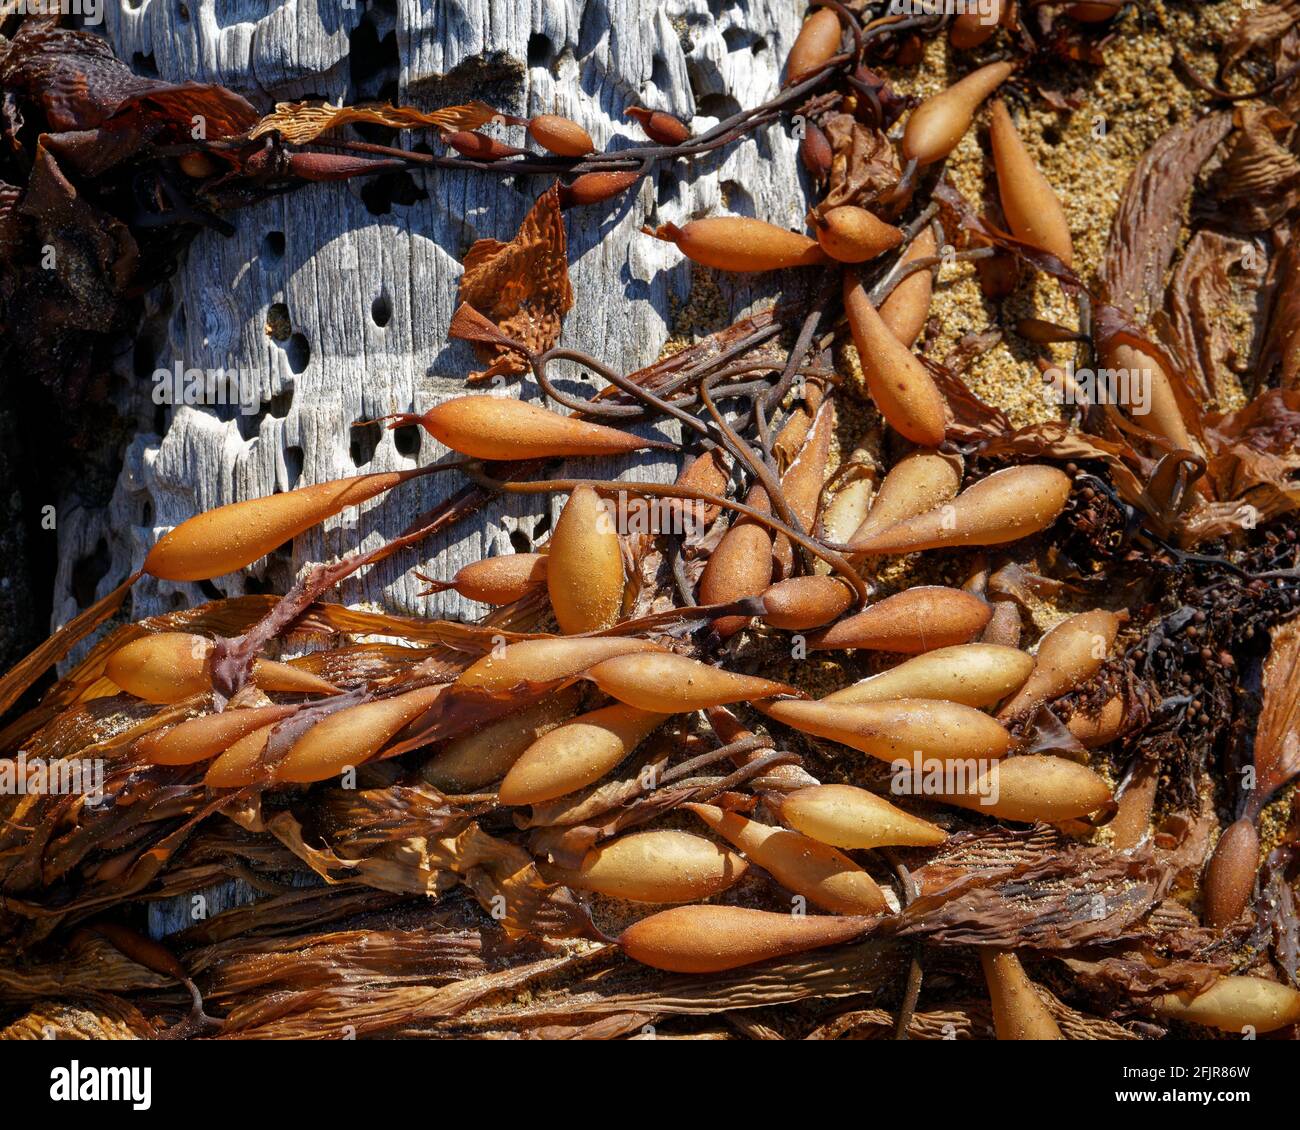 Bladder wrack, Scientific name: Fucus vesiculosus seaweed wrapped around driftwood and washed up on a beach, east coast, New Zealand. Stock Photo